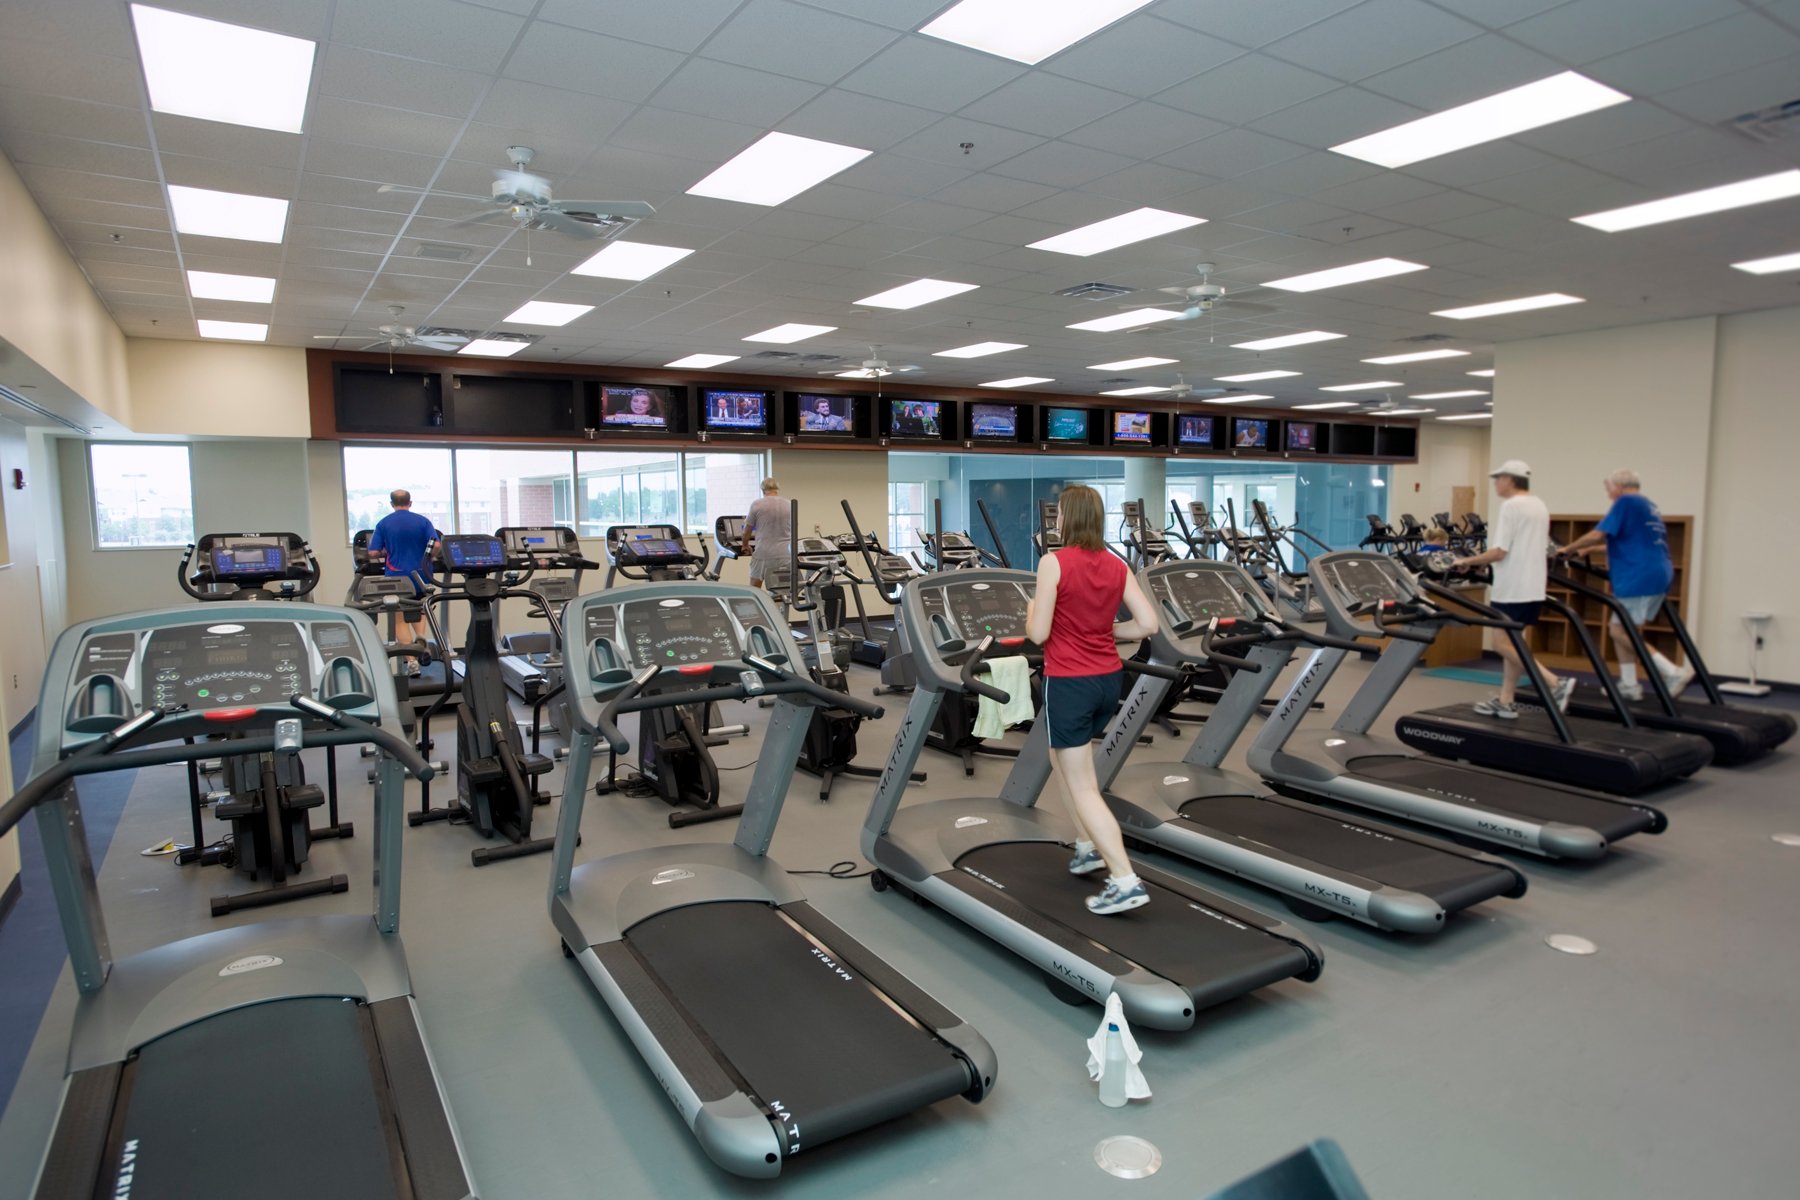 The fitness center at Middle Tennessee State University in Nashville, the host institution of ELS Language Centers in Tennessee, USA.